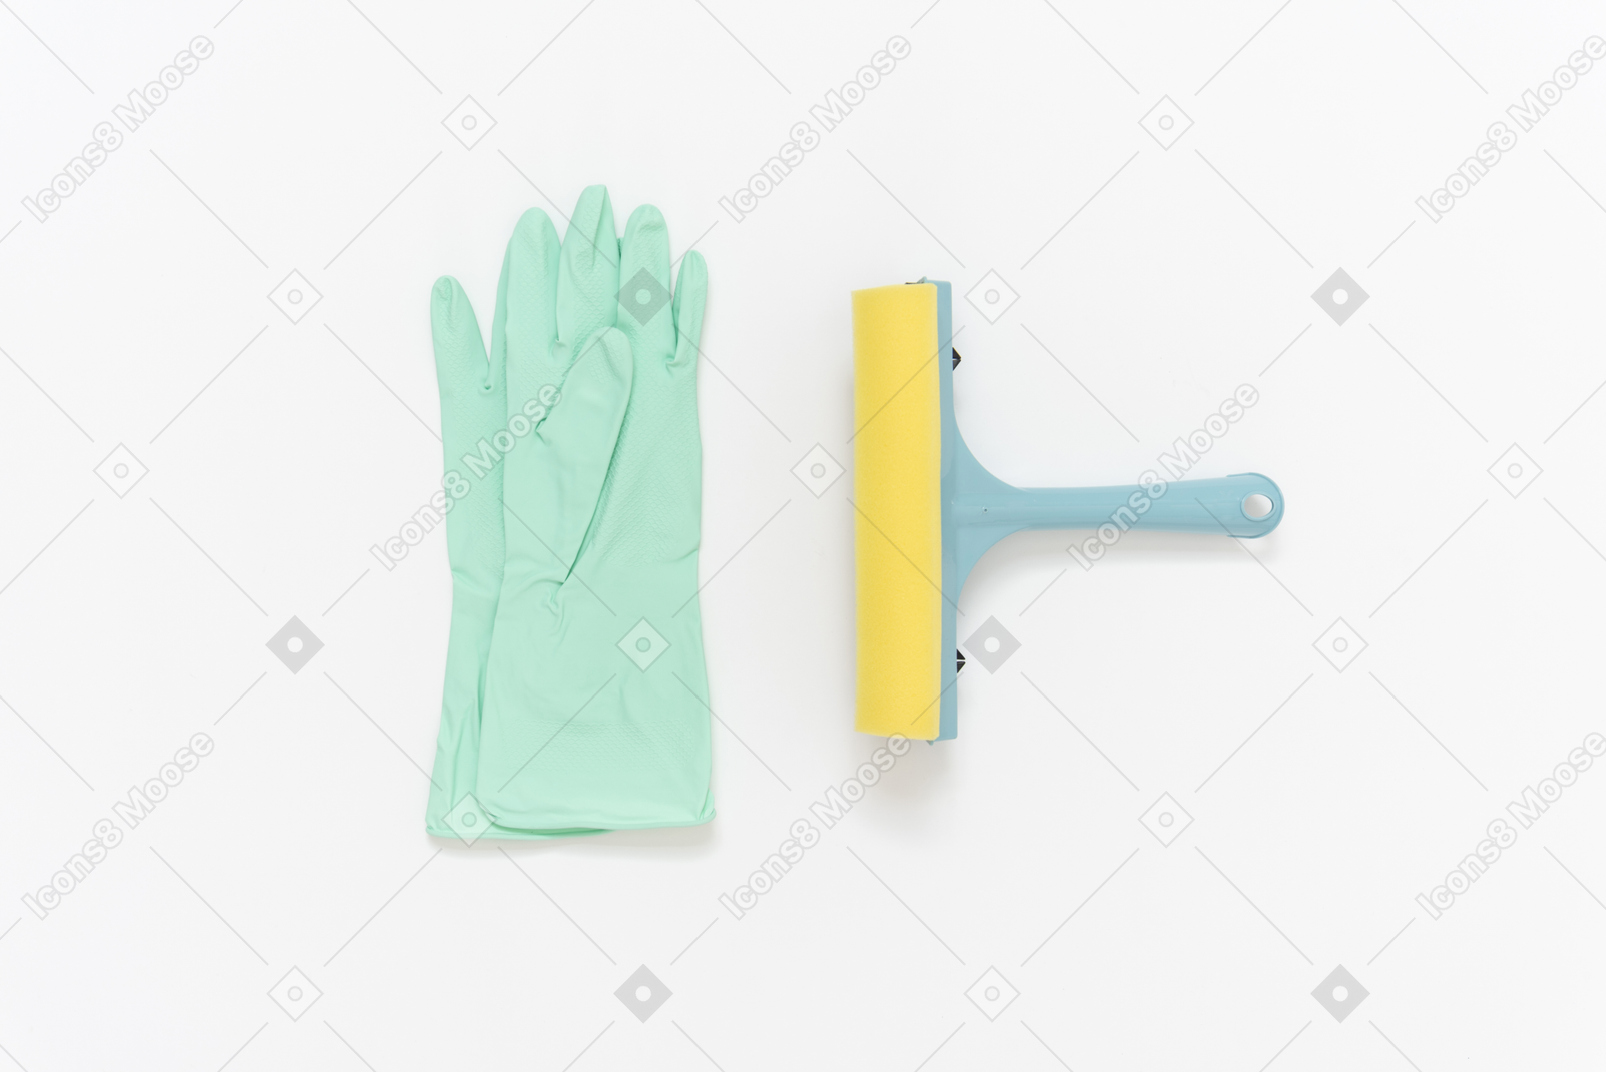 Rubber gloves and a glass wiper lying near each other on the plain white background